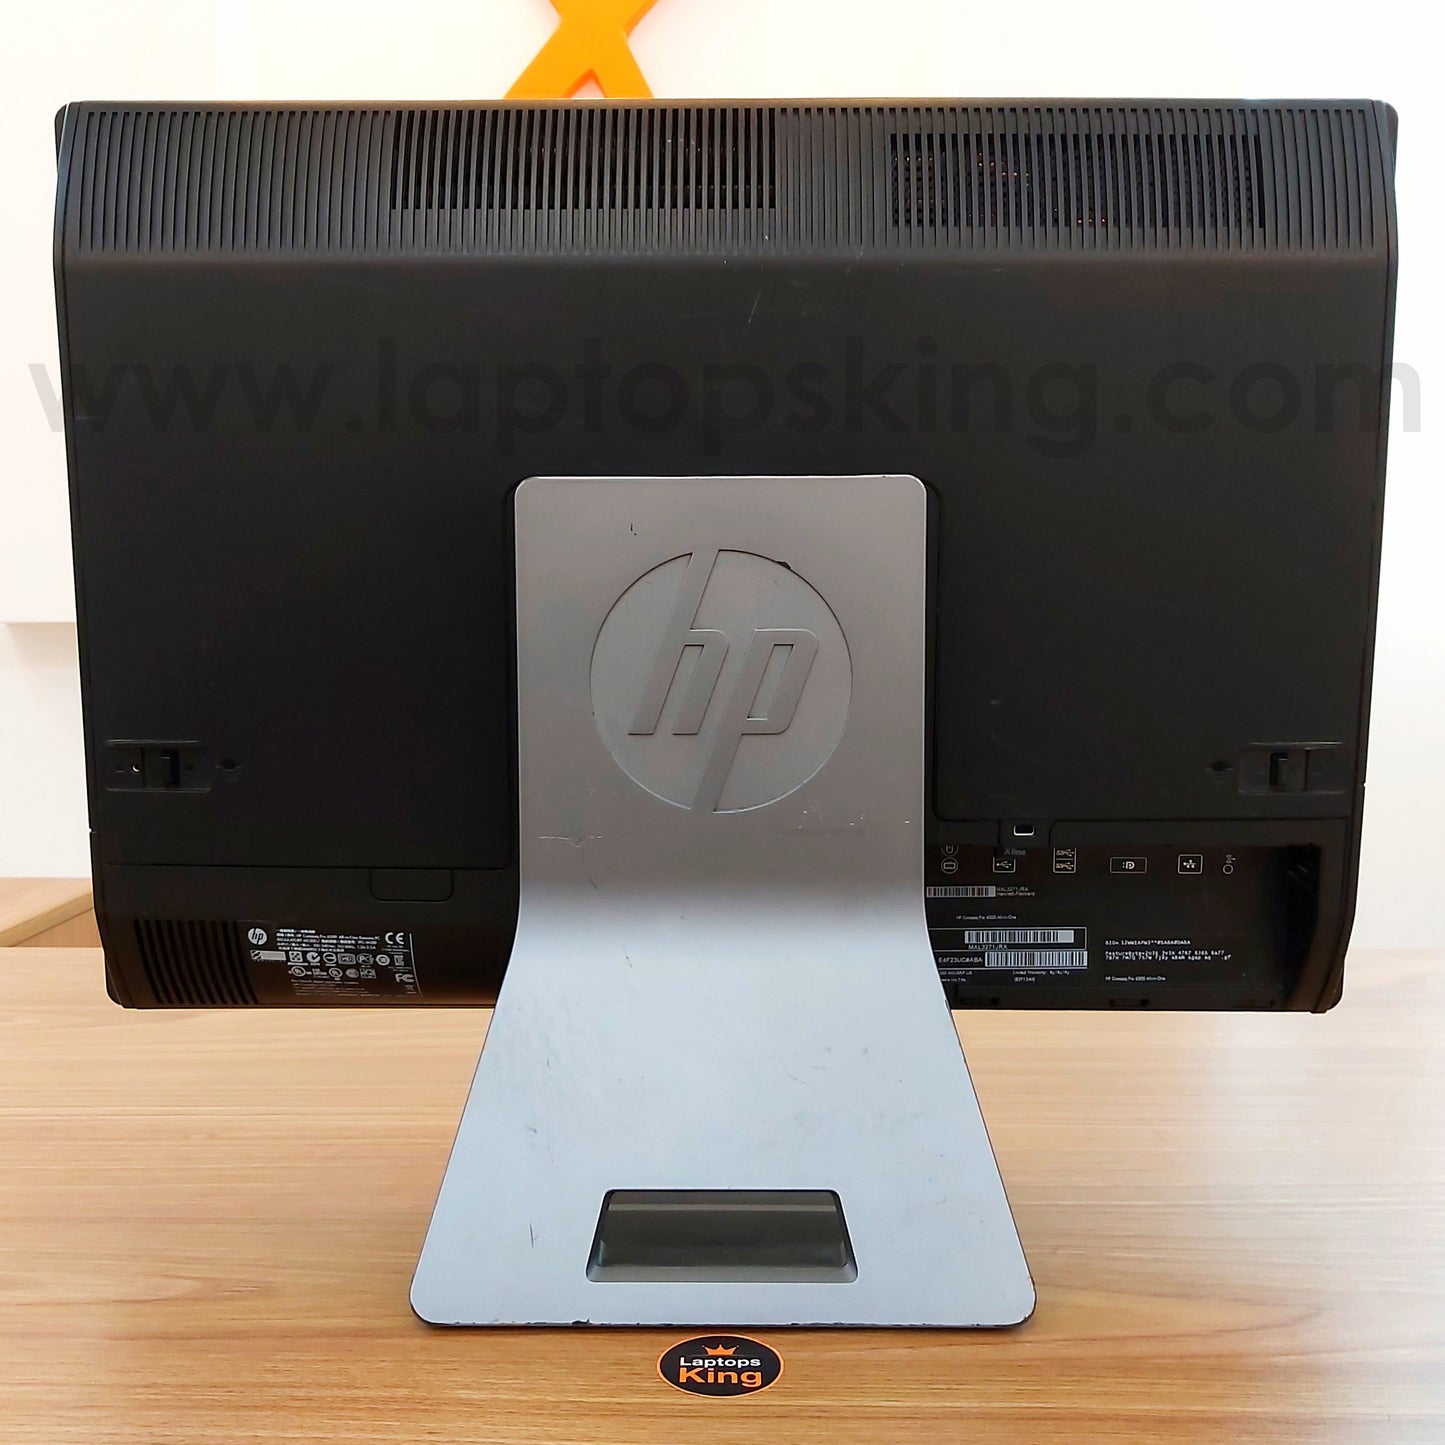 HP Pro 6300 Core i5 Non-Touch All-In-One Desktop Computer Offers (Used Very Clean)